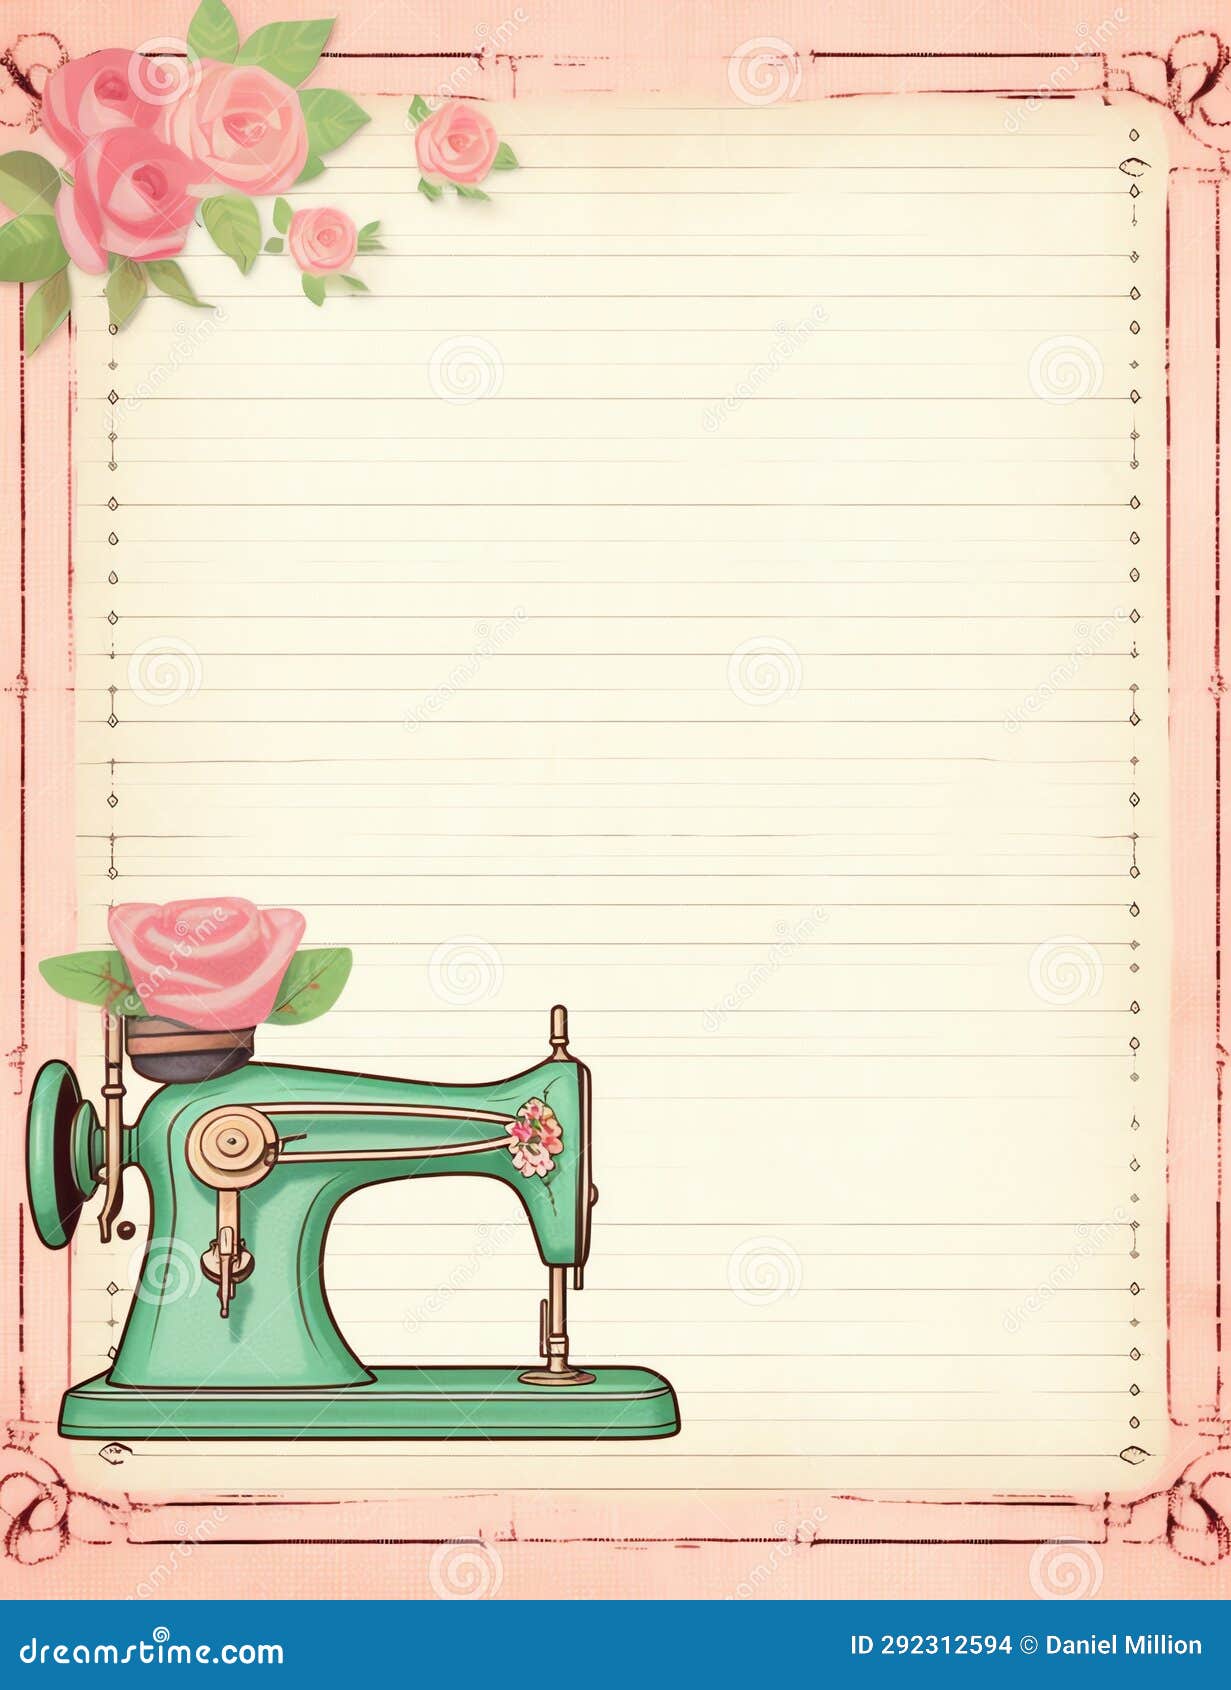 Cottagecore Sewing Machine Lined Paper Old Paper, Vintage Digital Paper ...